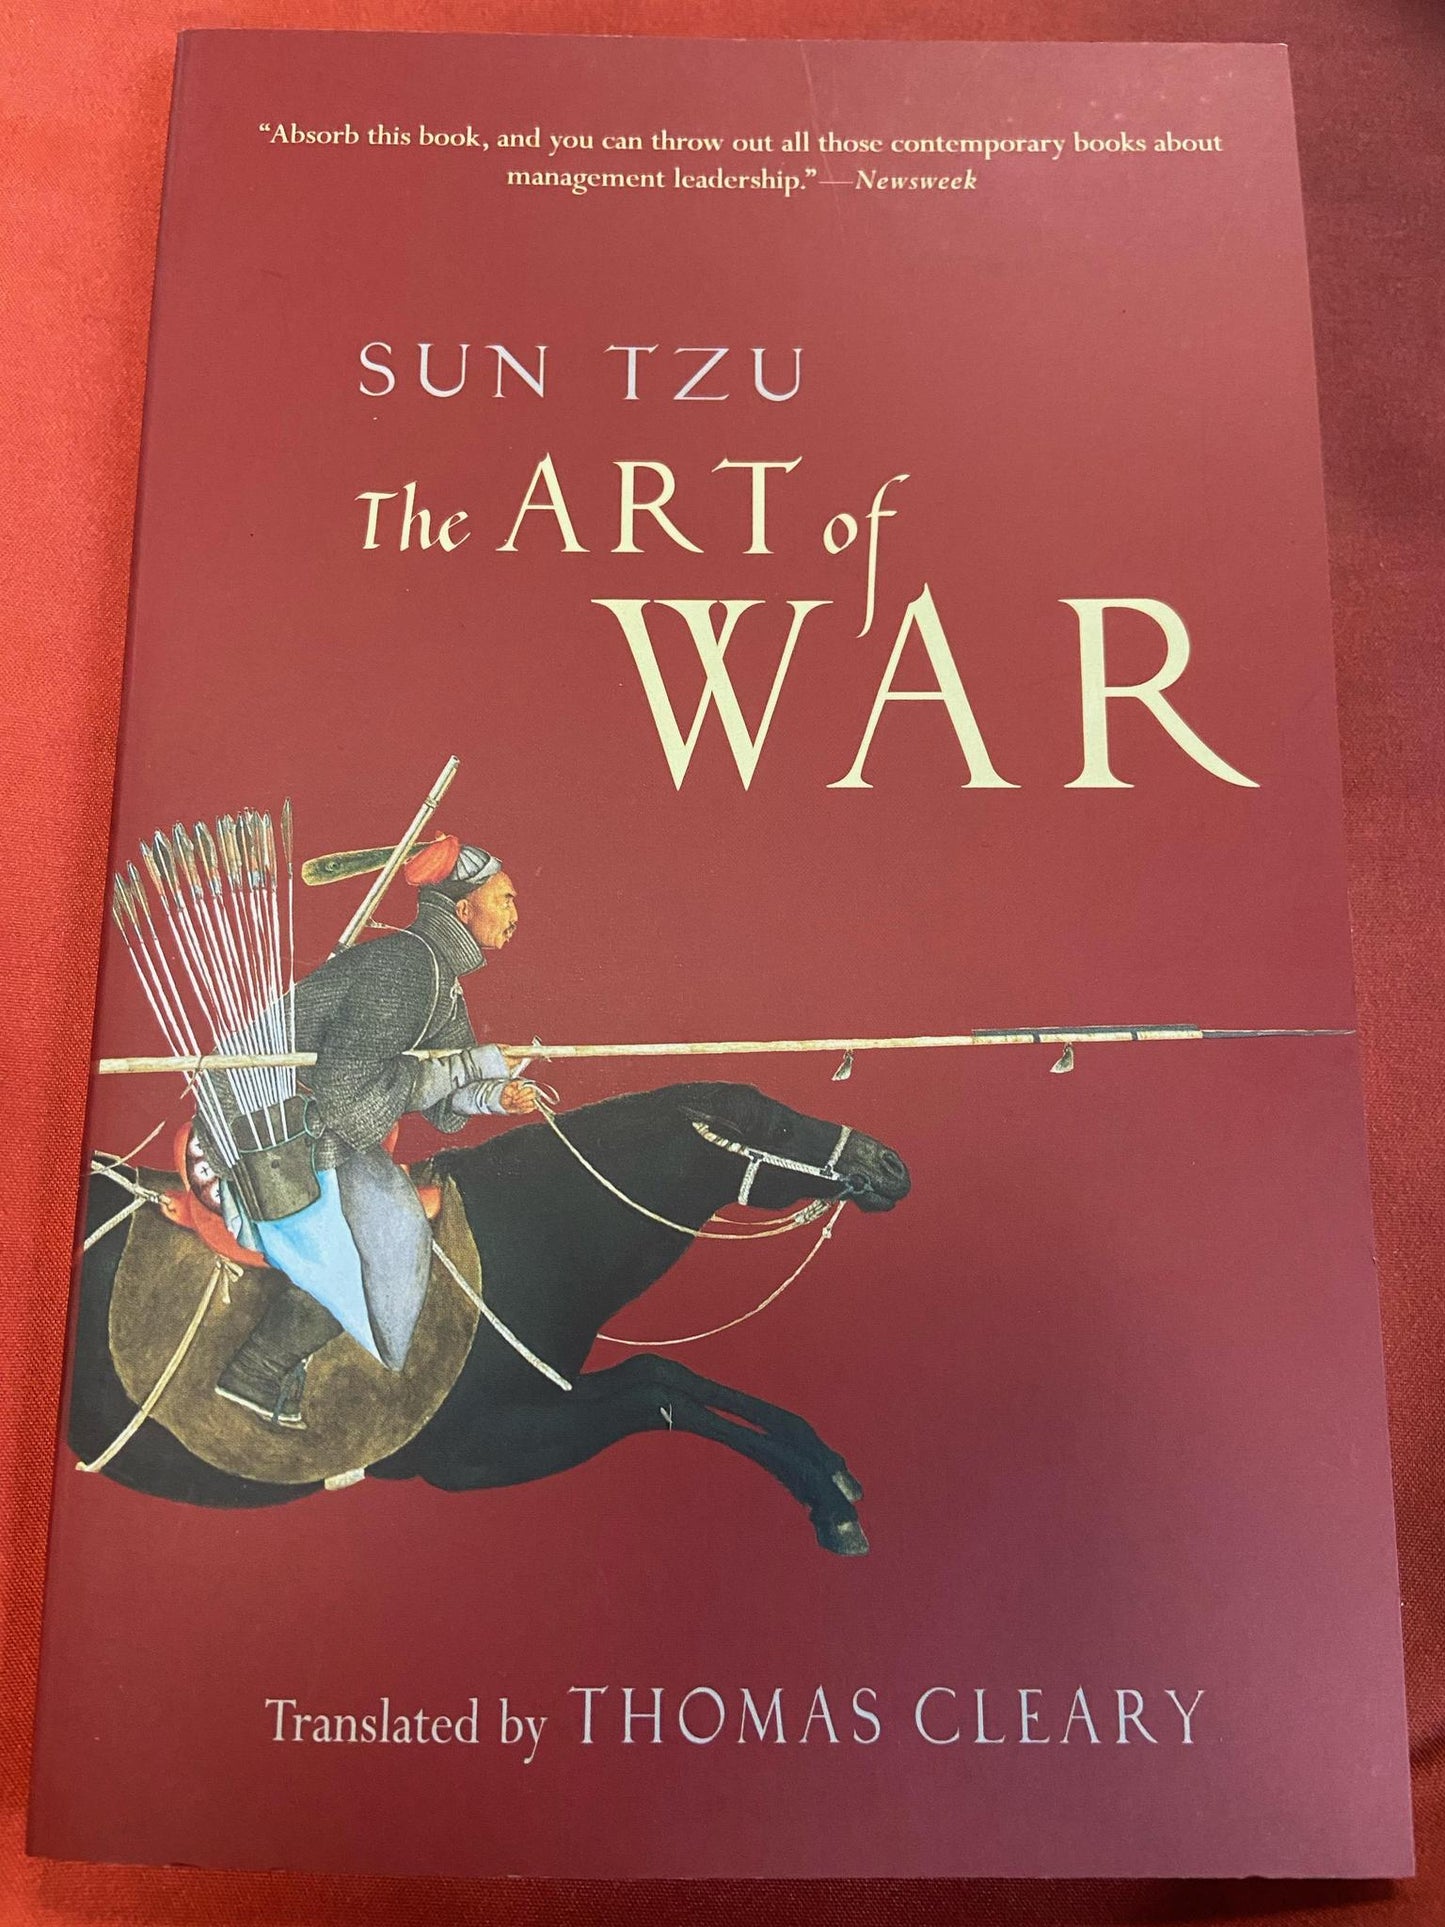 "The Art of War" by Sun Tzu & Thomas Cleary